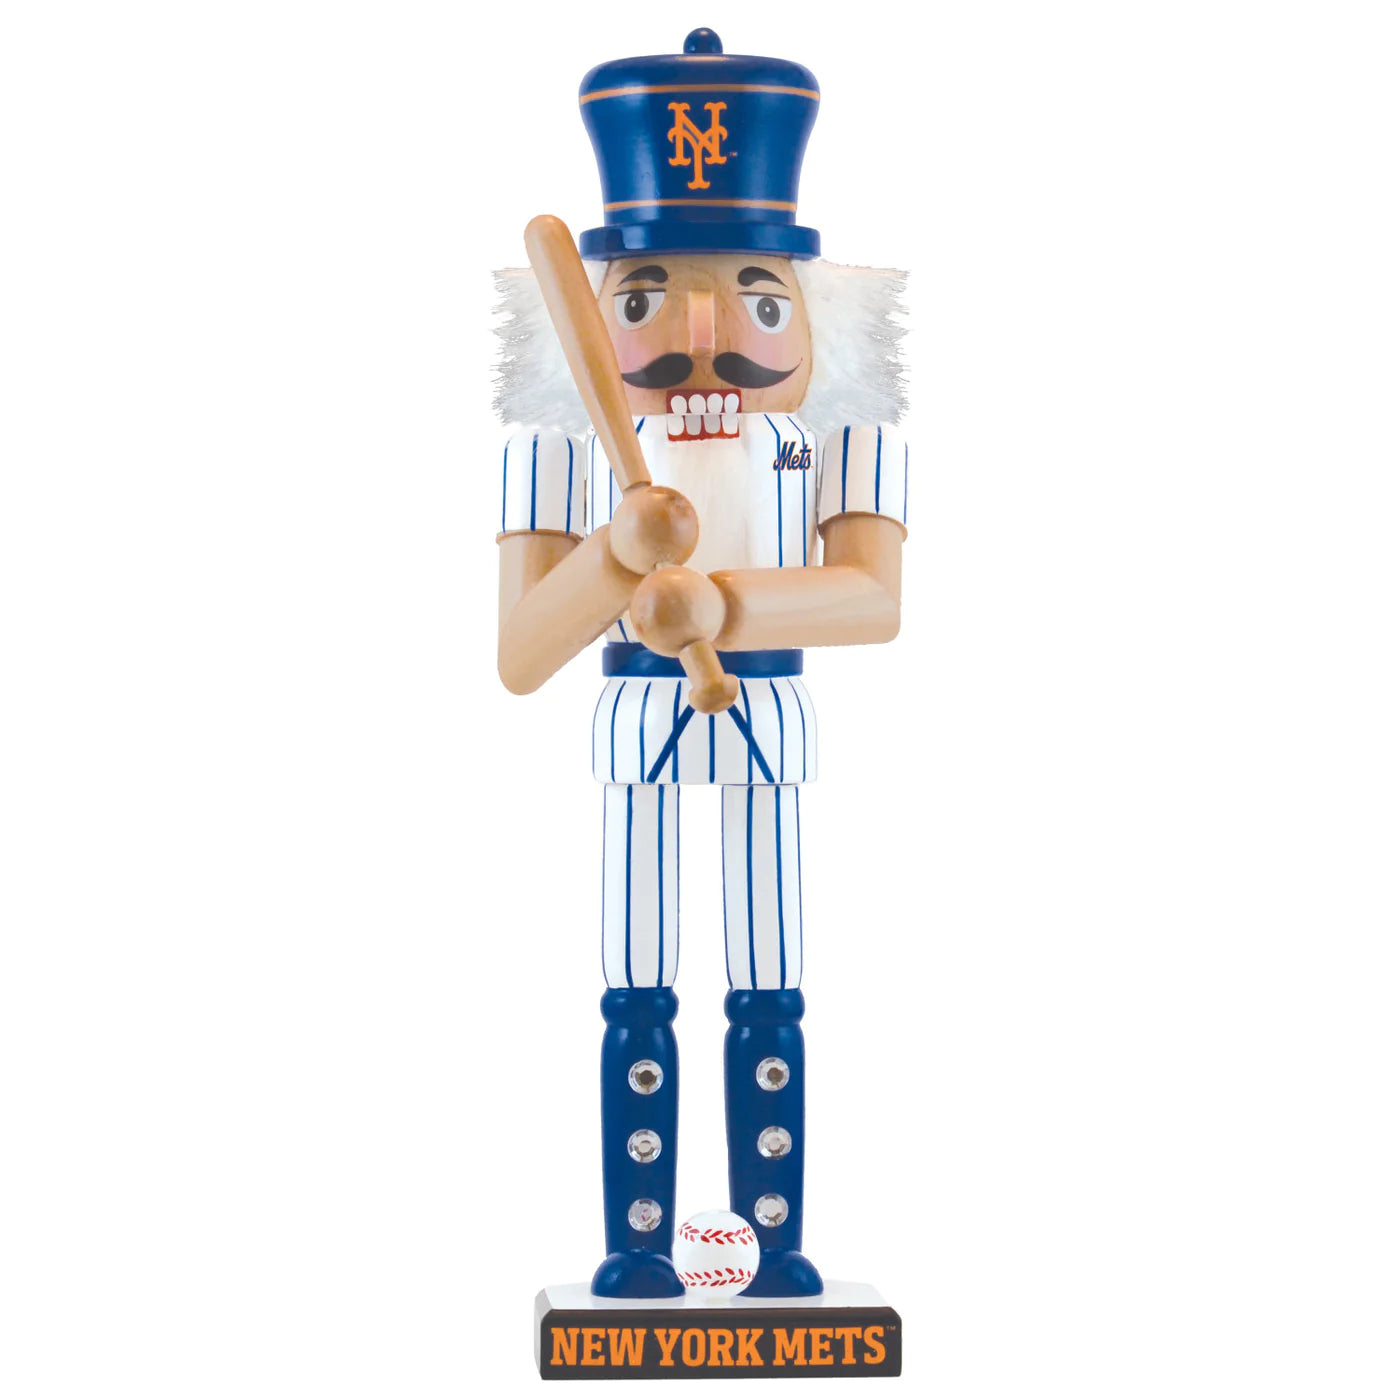 New York Mets Collectible 12" Wooden Nutcracker by Masterpieces